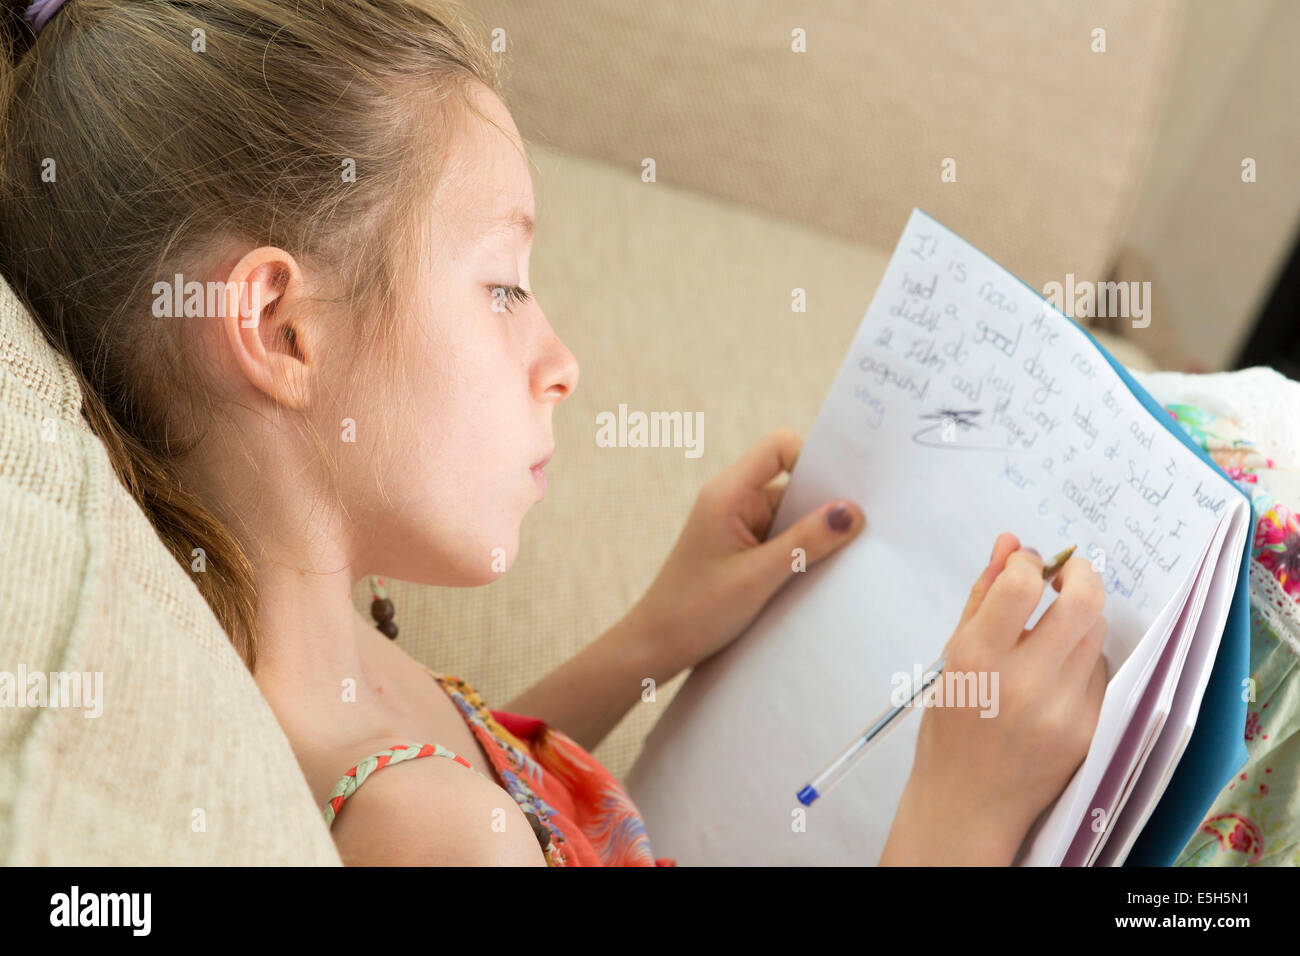 young girl writing essay / doing homework / in diary Stock Photo